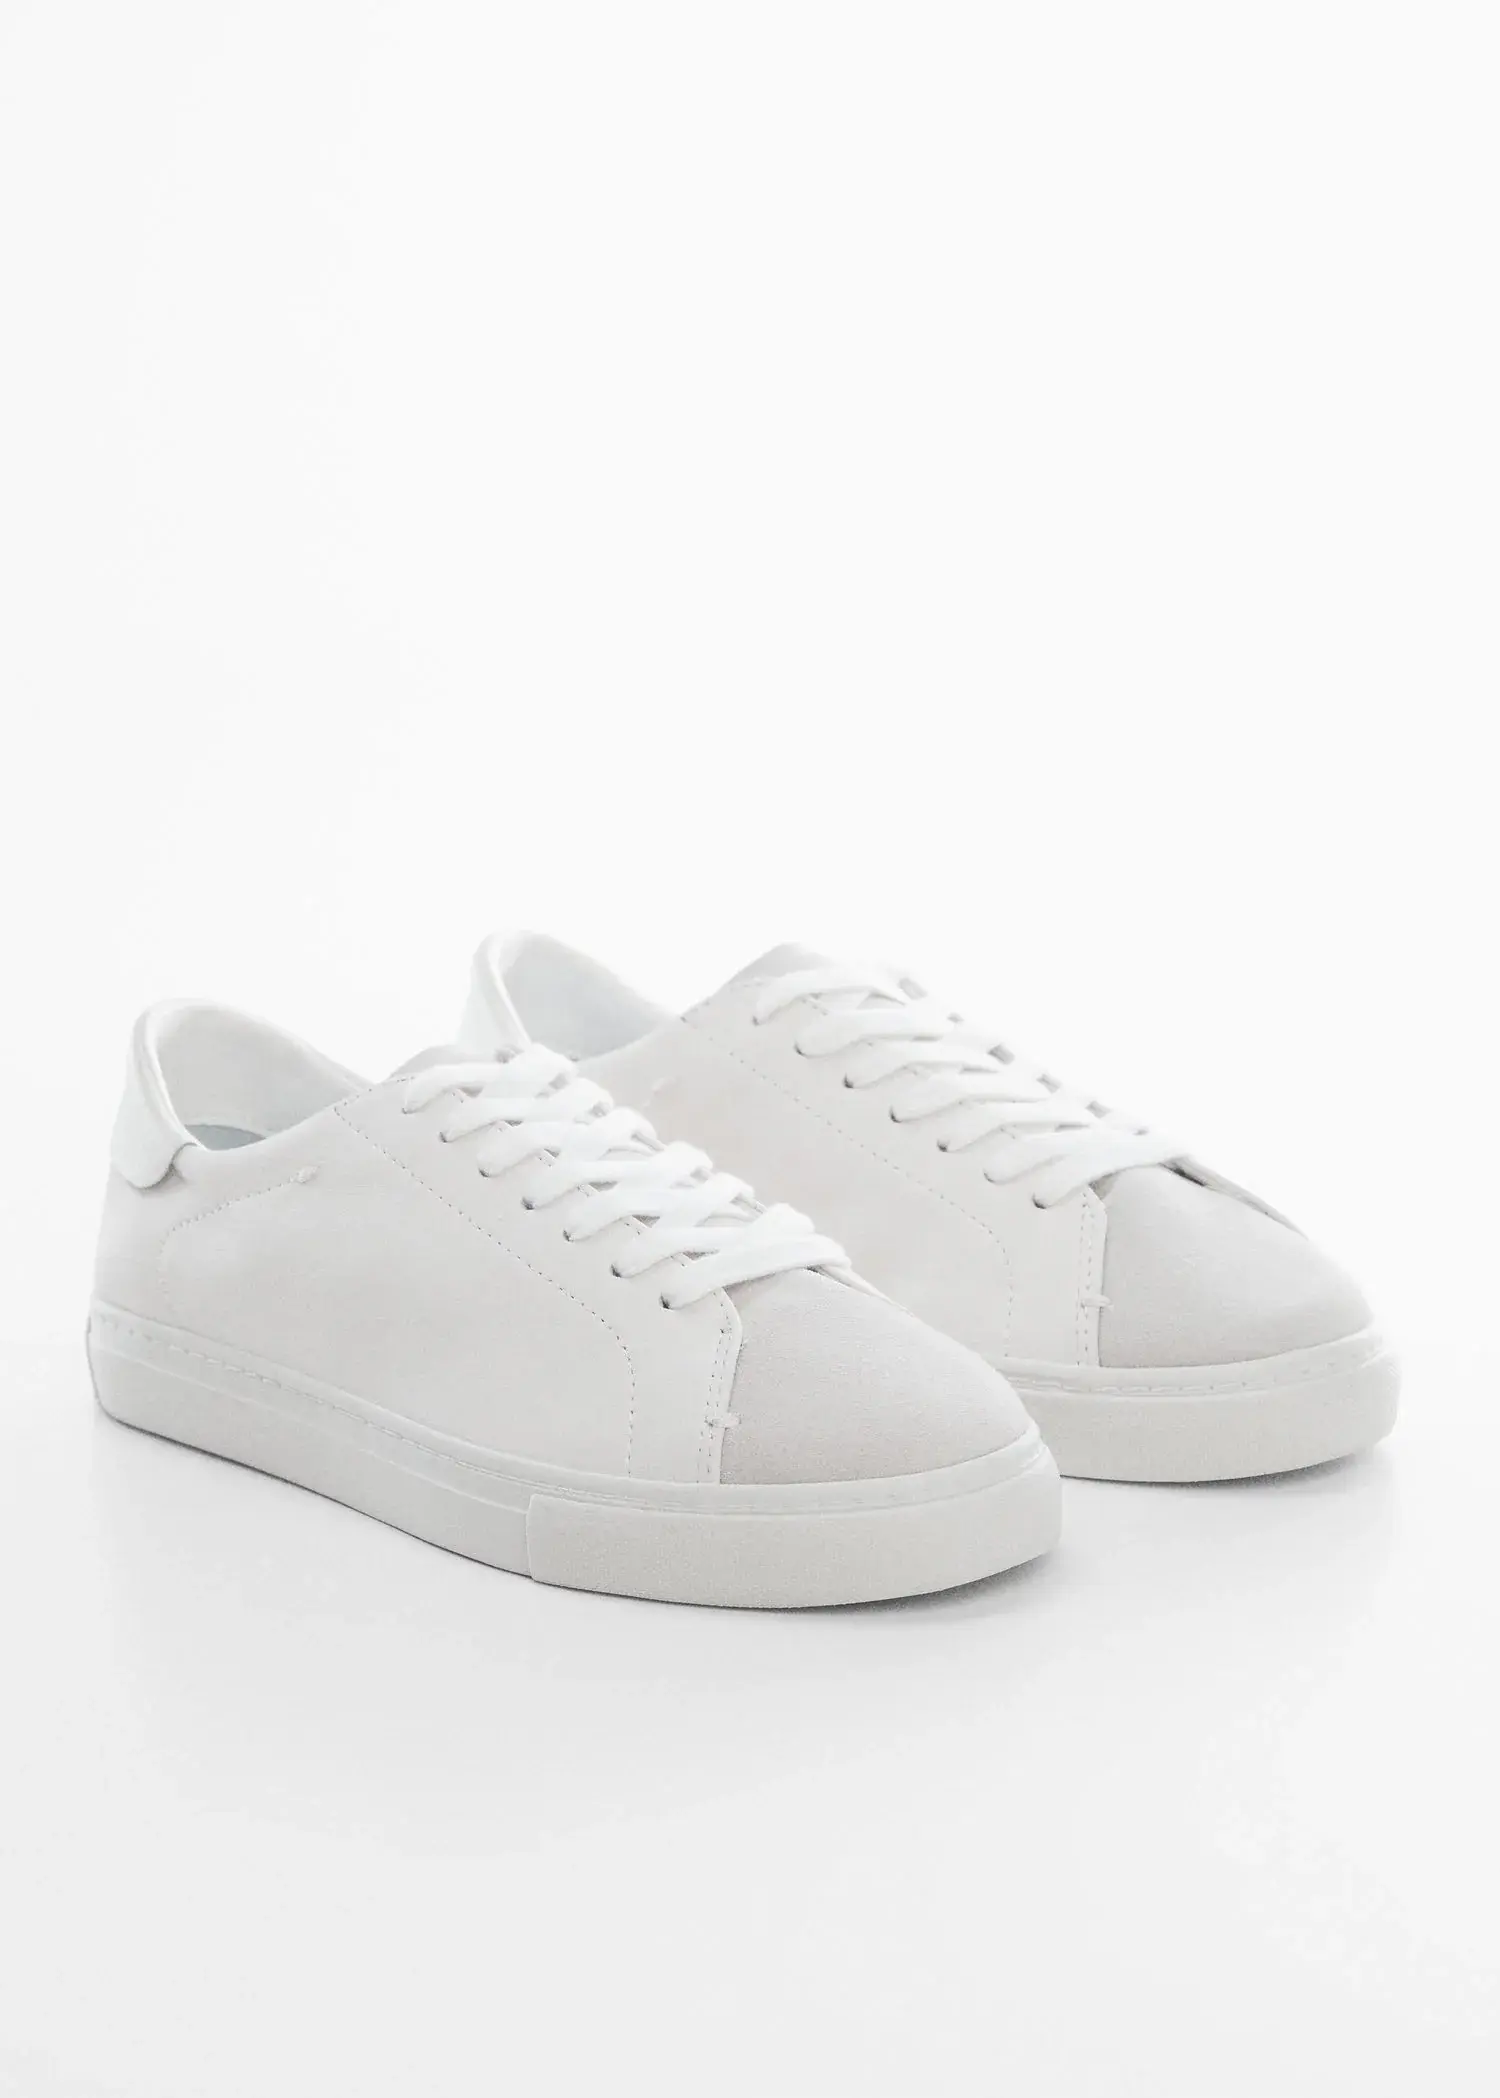 Mango Leather panel sneakers. a pair of white sneakers on a white surface. 